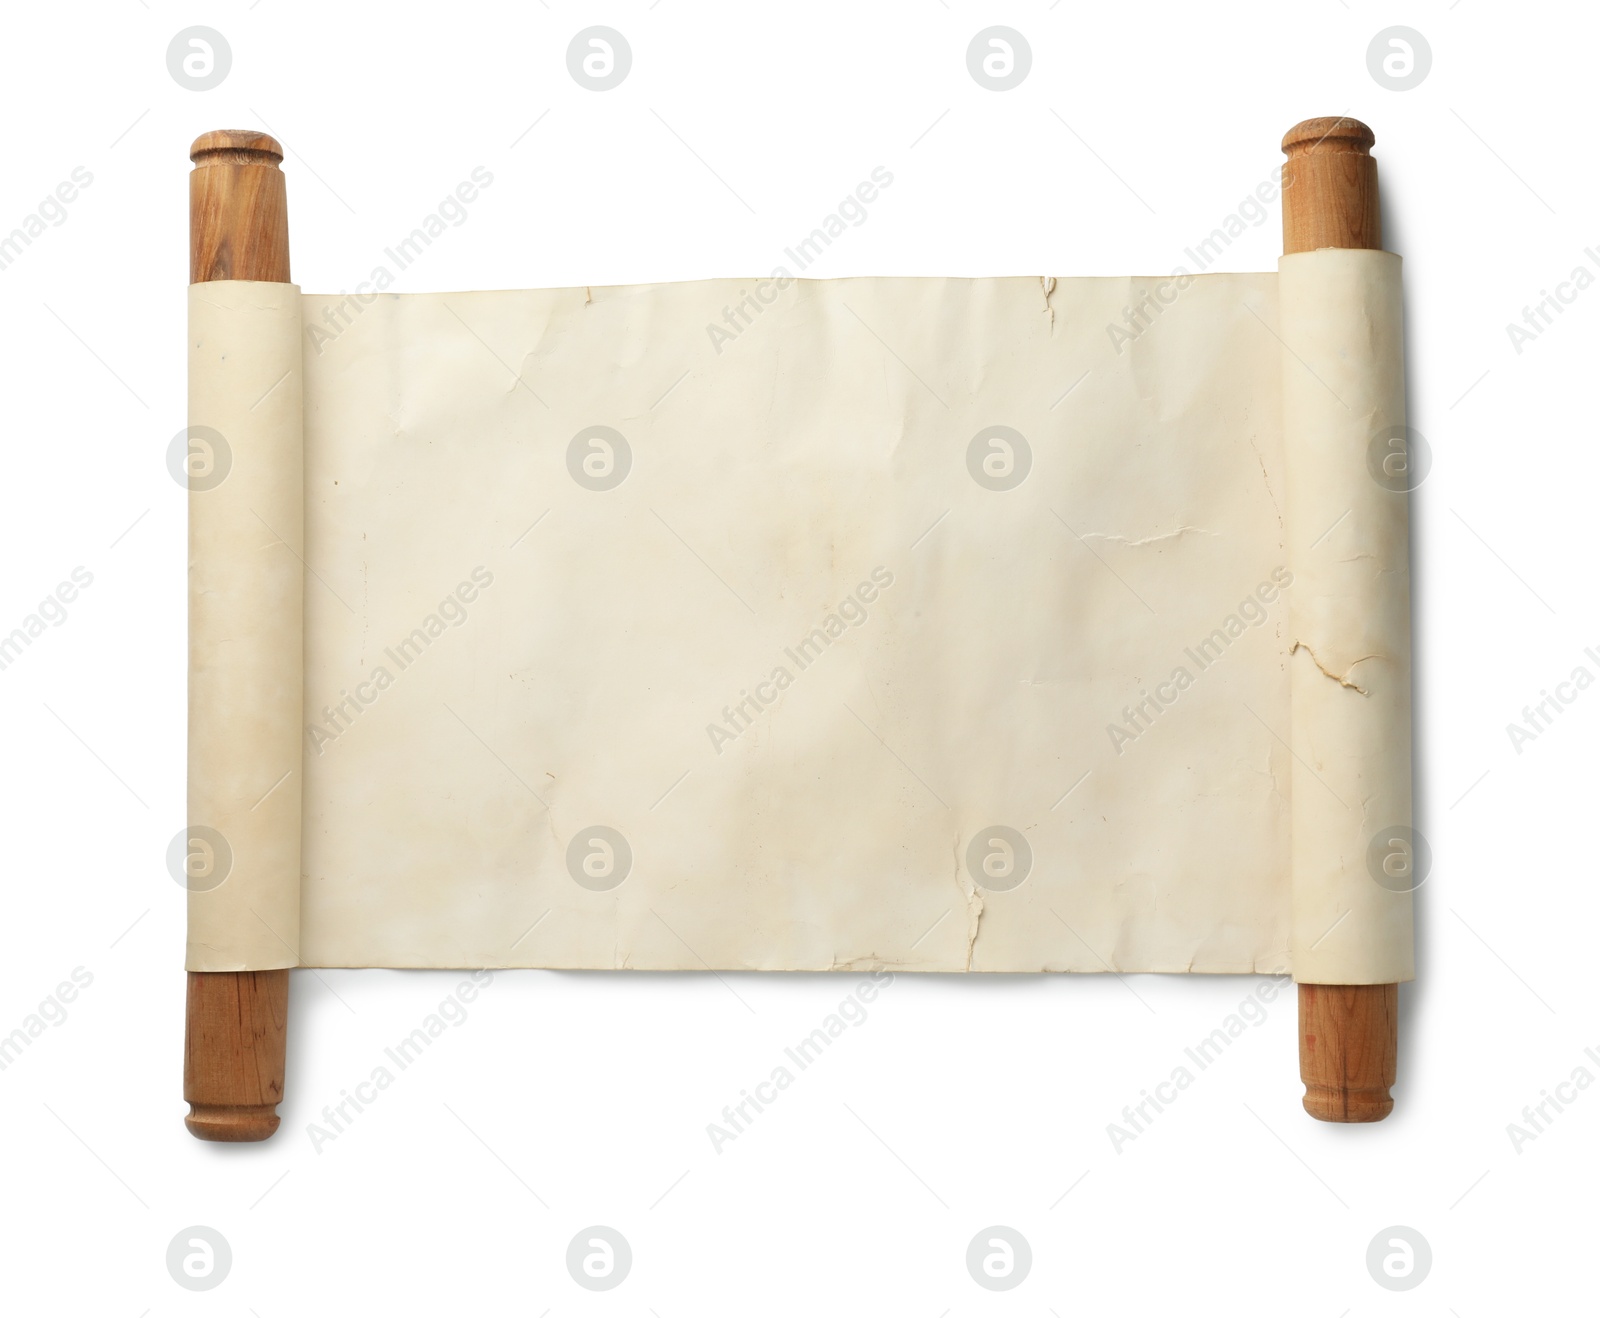 Photo of Scroll of old parchment paper with wooden handles isolated on white, top view